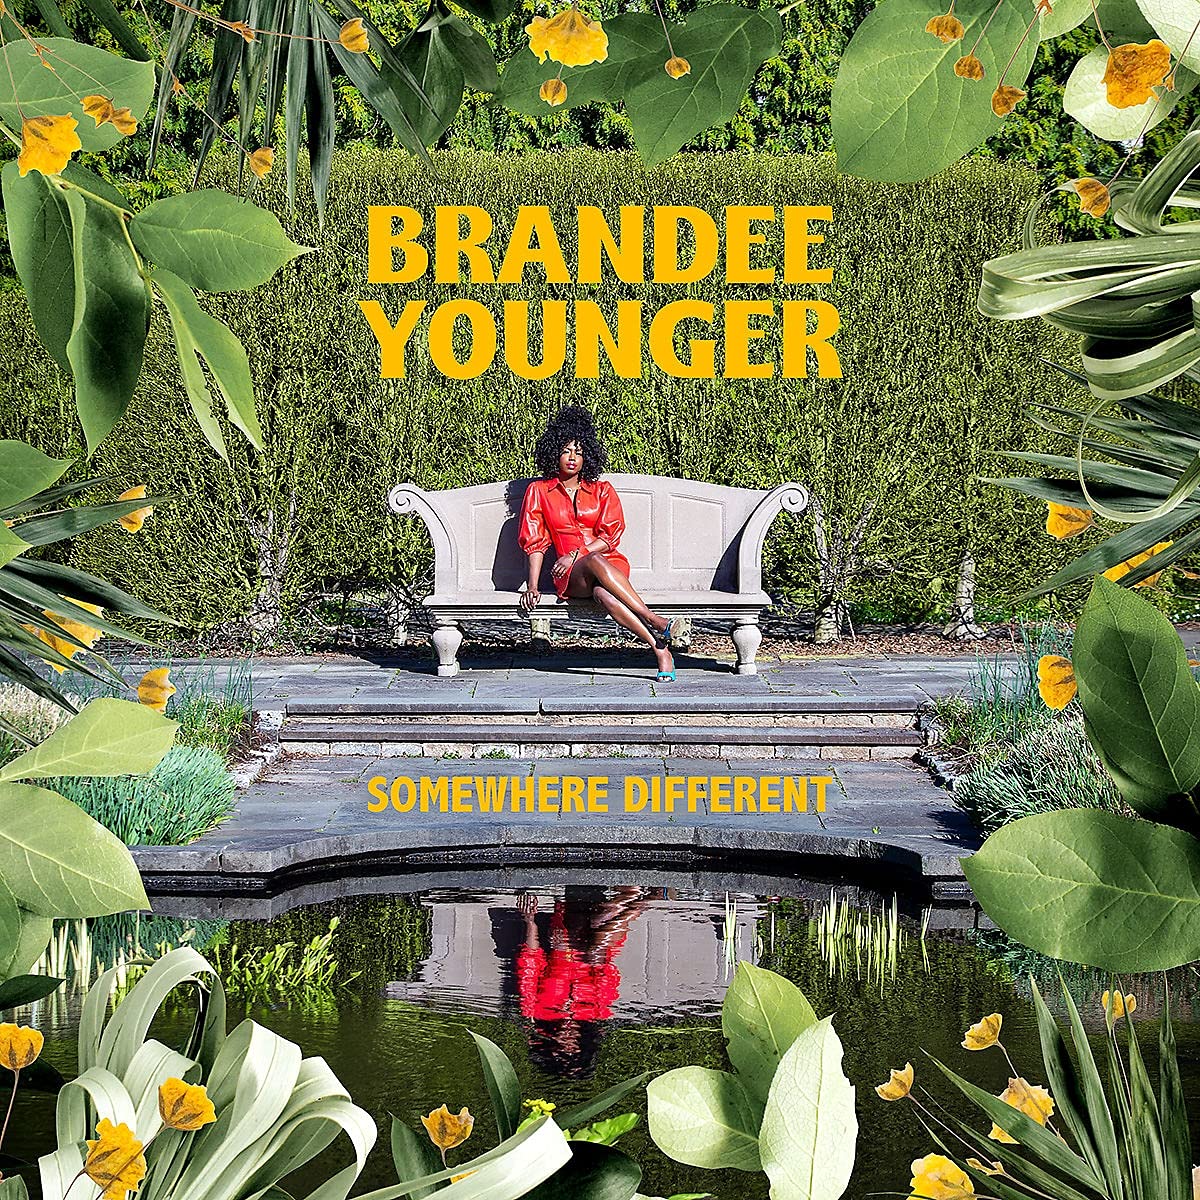 Brandee Younger - Somewhere Different (2021) [FLAC 24bit/96kHz]